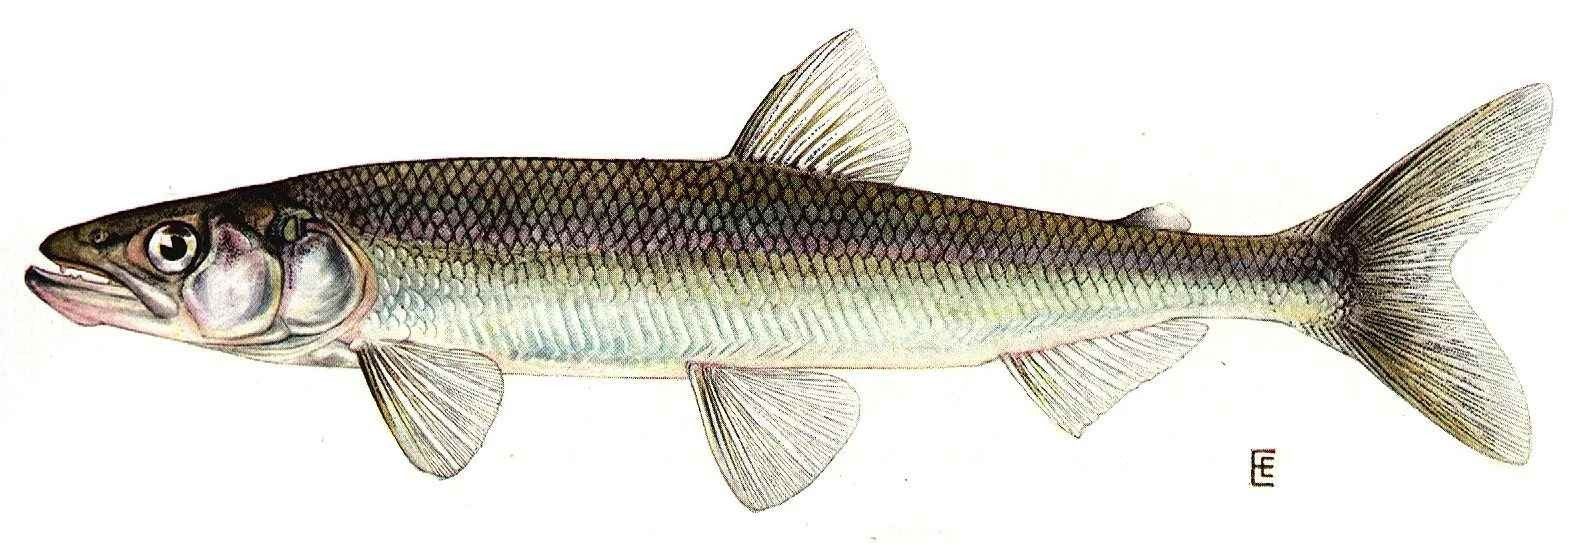 Fun Rainbow Smelt Facts For Kids